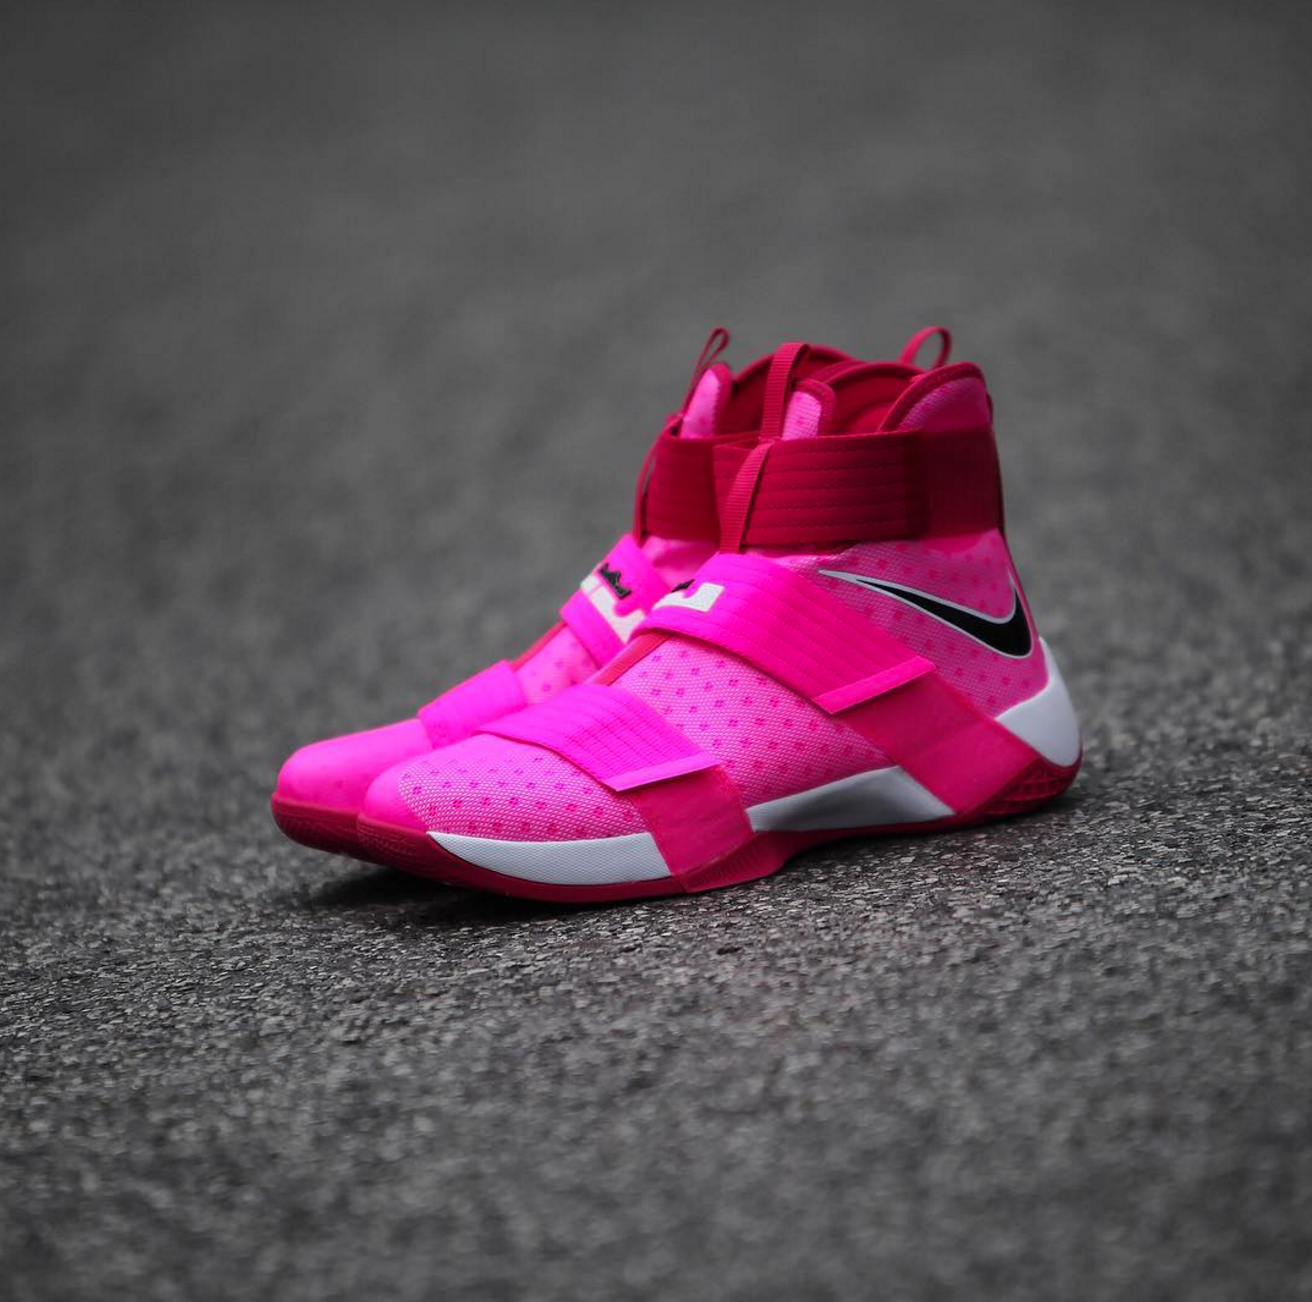 nike lebron soldier 10 breast cancer 2 